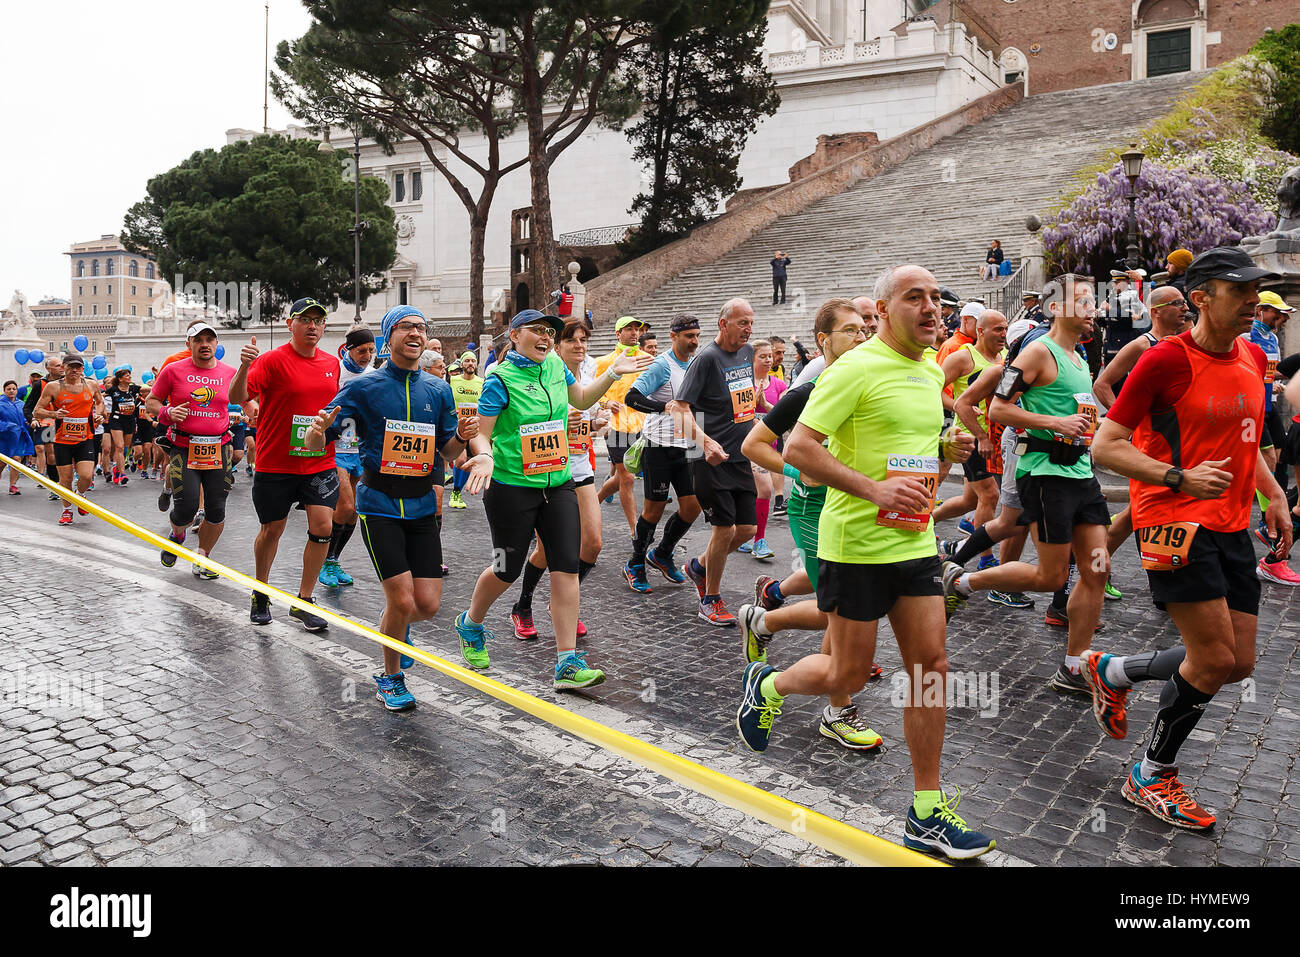 Rome, Italy - April 2, 2017: Athletes participating at the 23rd Rome marathon run through the street circuit passing the Capitol, seat of the Municipa Stock Photo